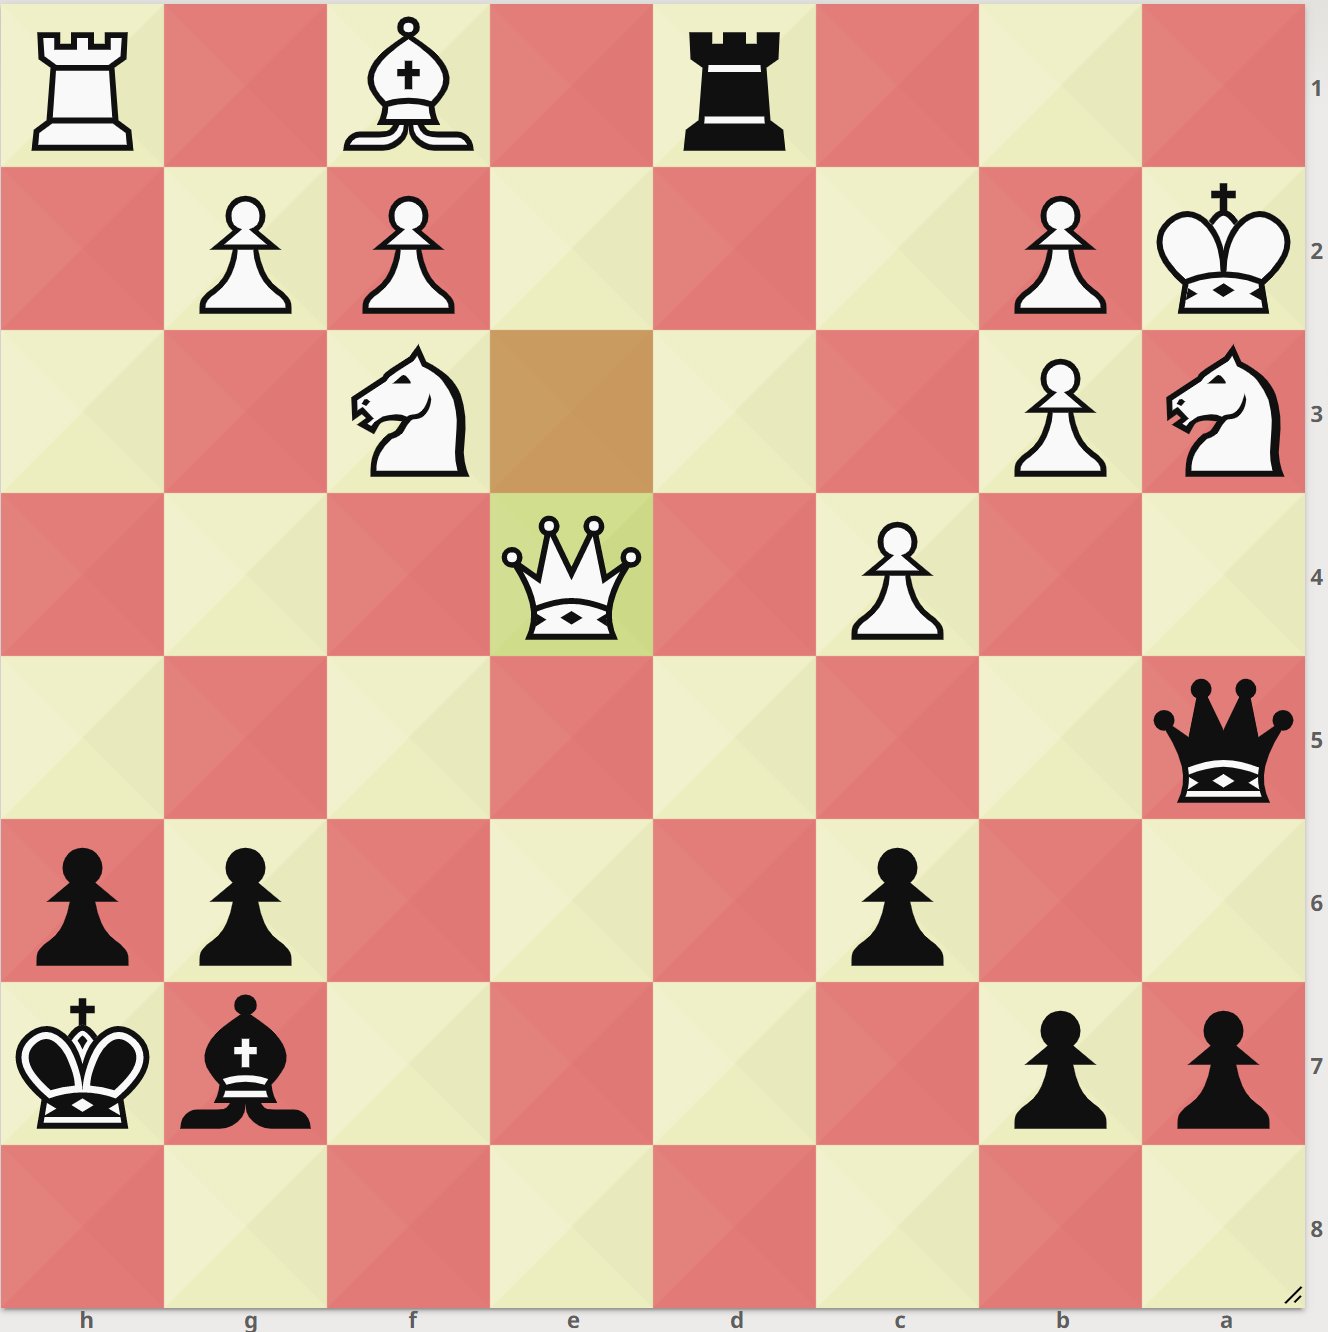 lichess.org on X: Your turn! Black to move and win, can you find